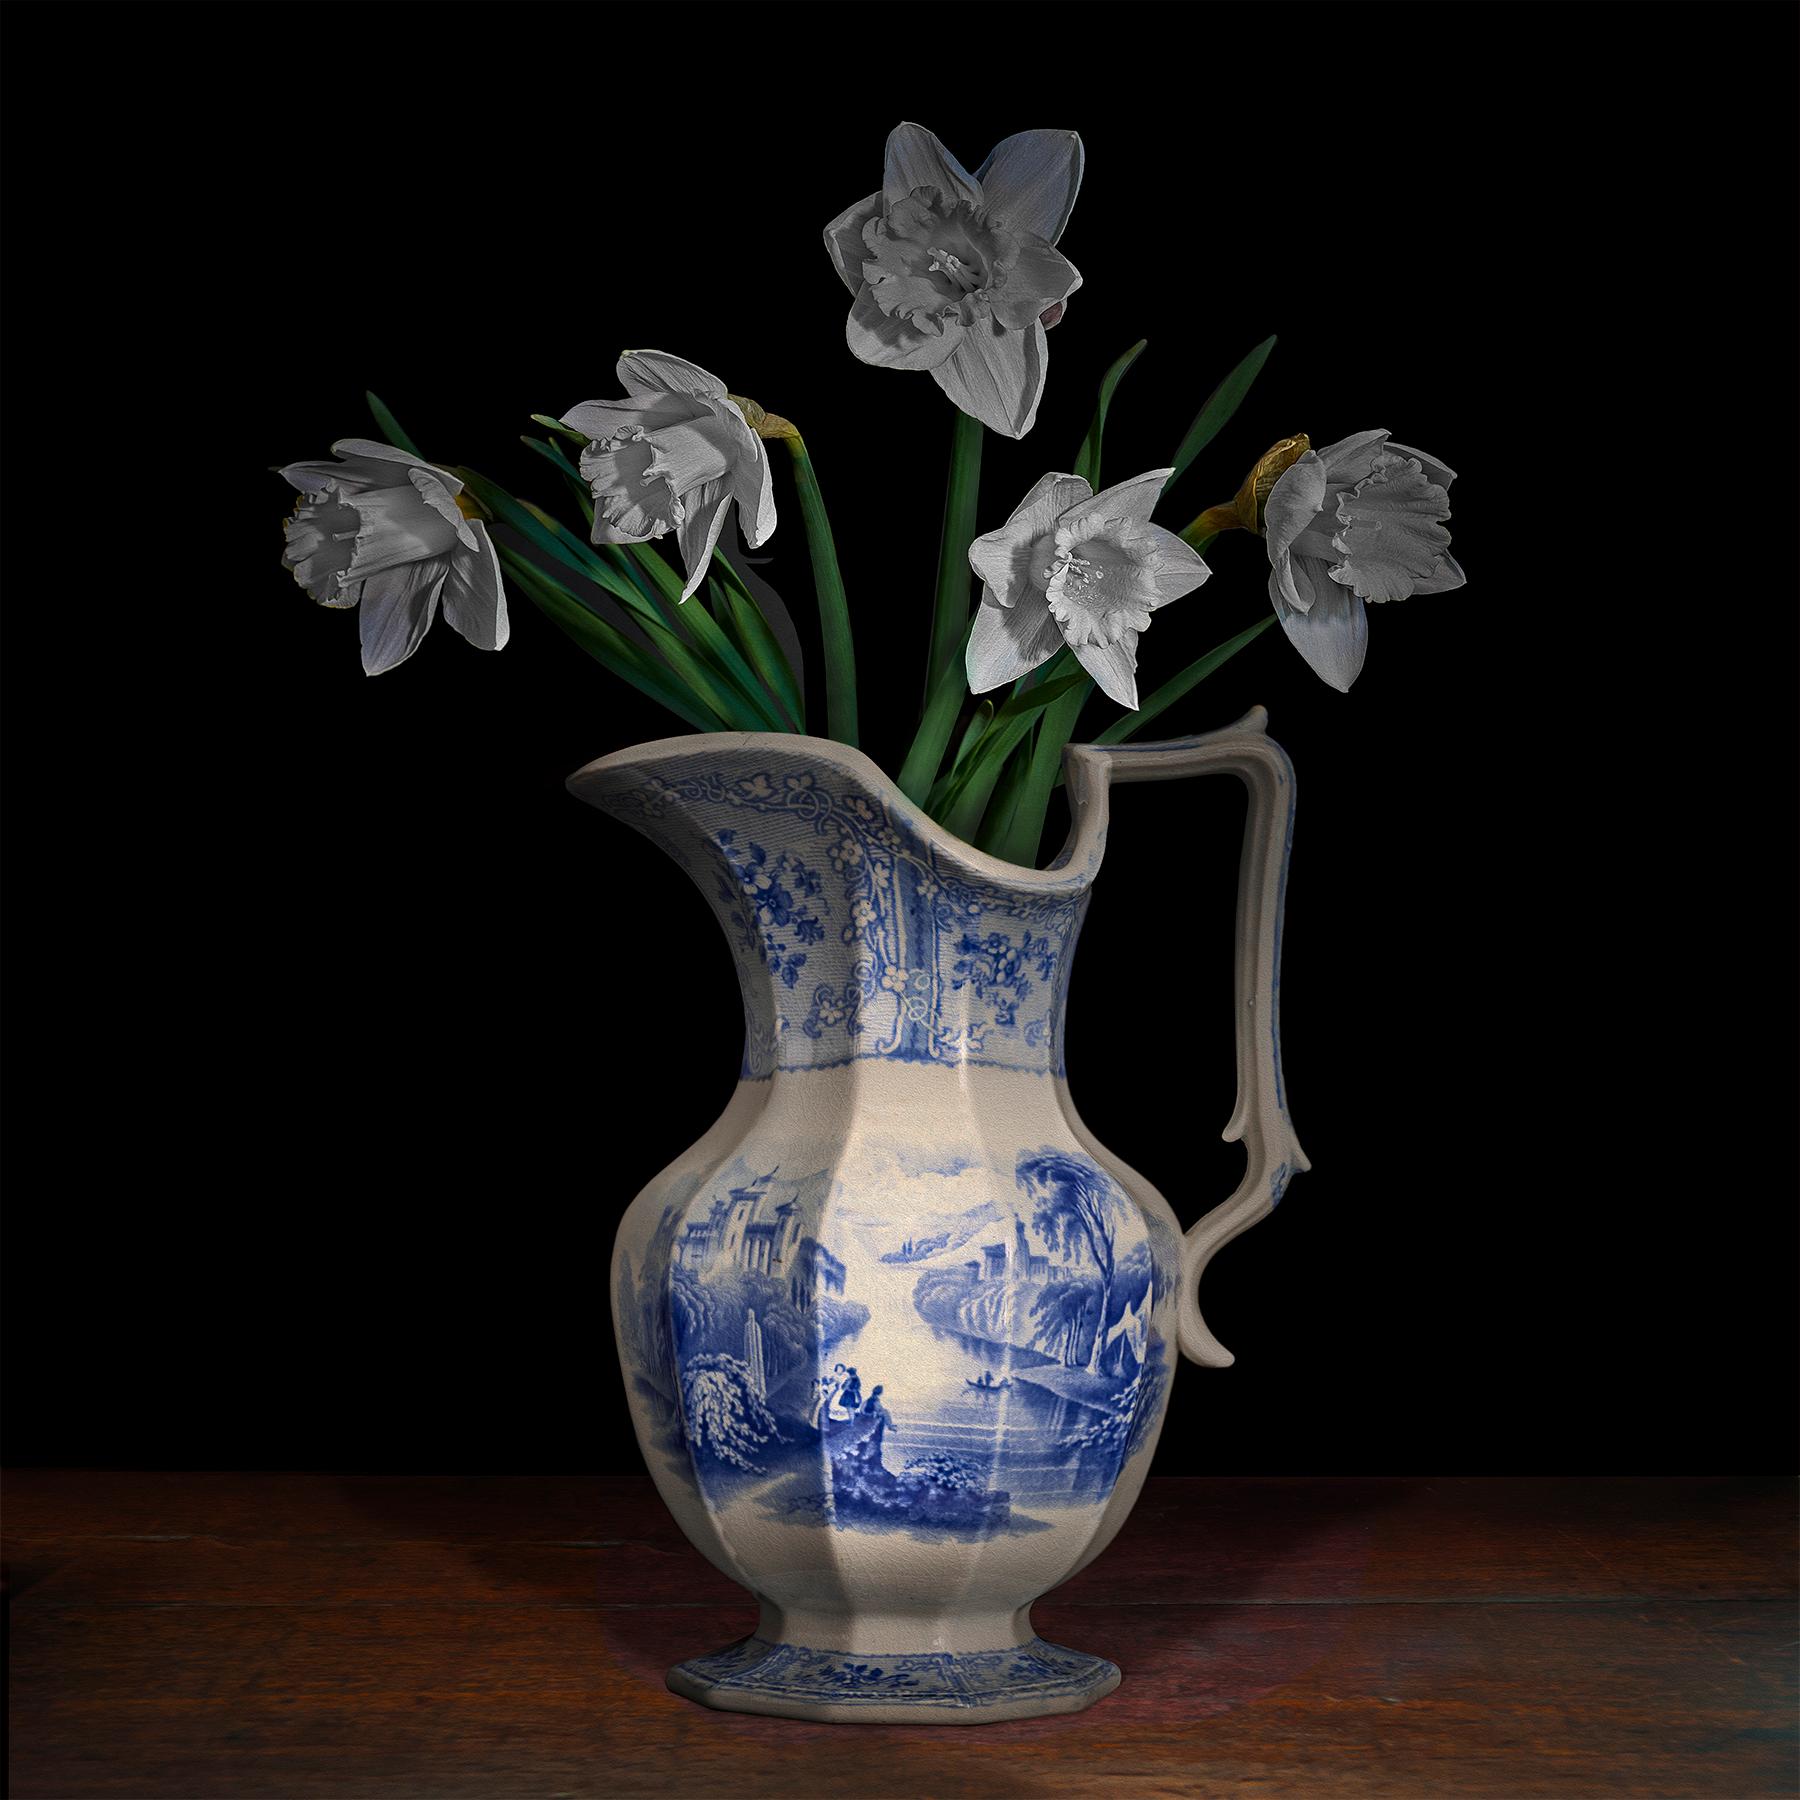 T.M. Glass Still-Life Photograph - Narcissus in a Staffordshire Pitcher